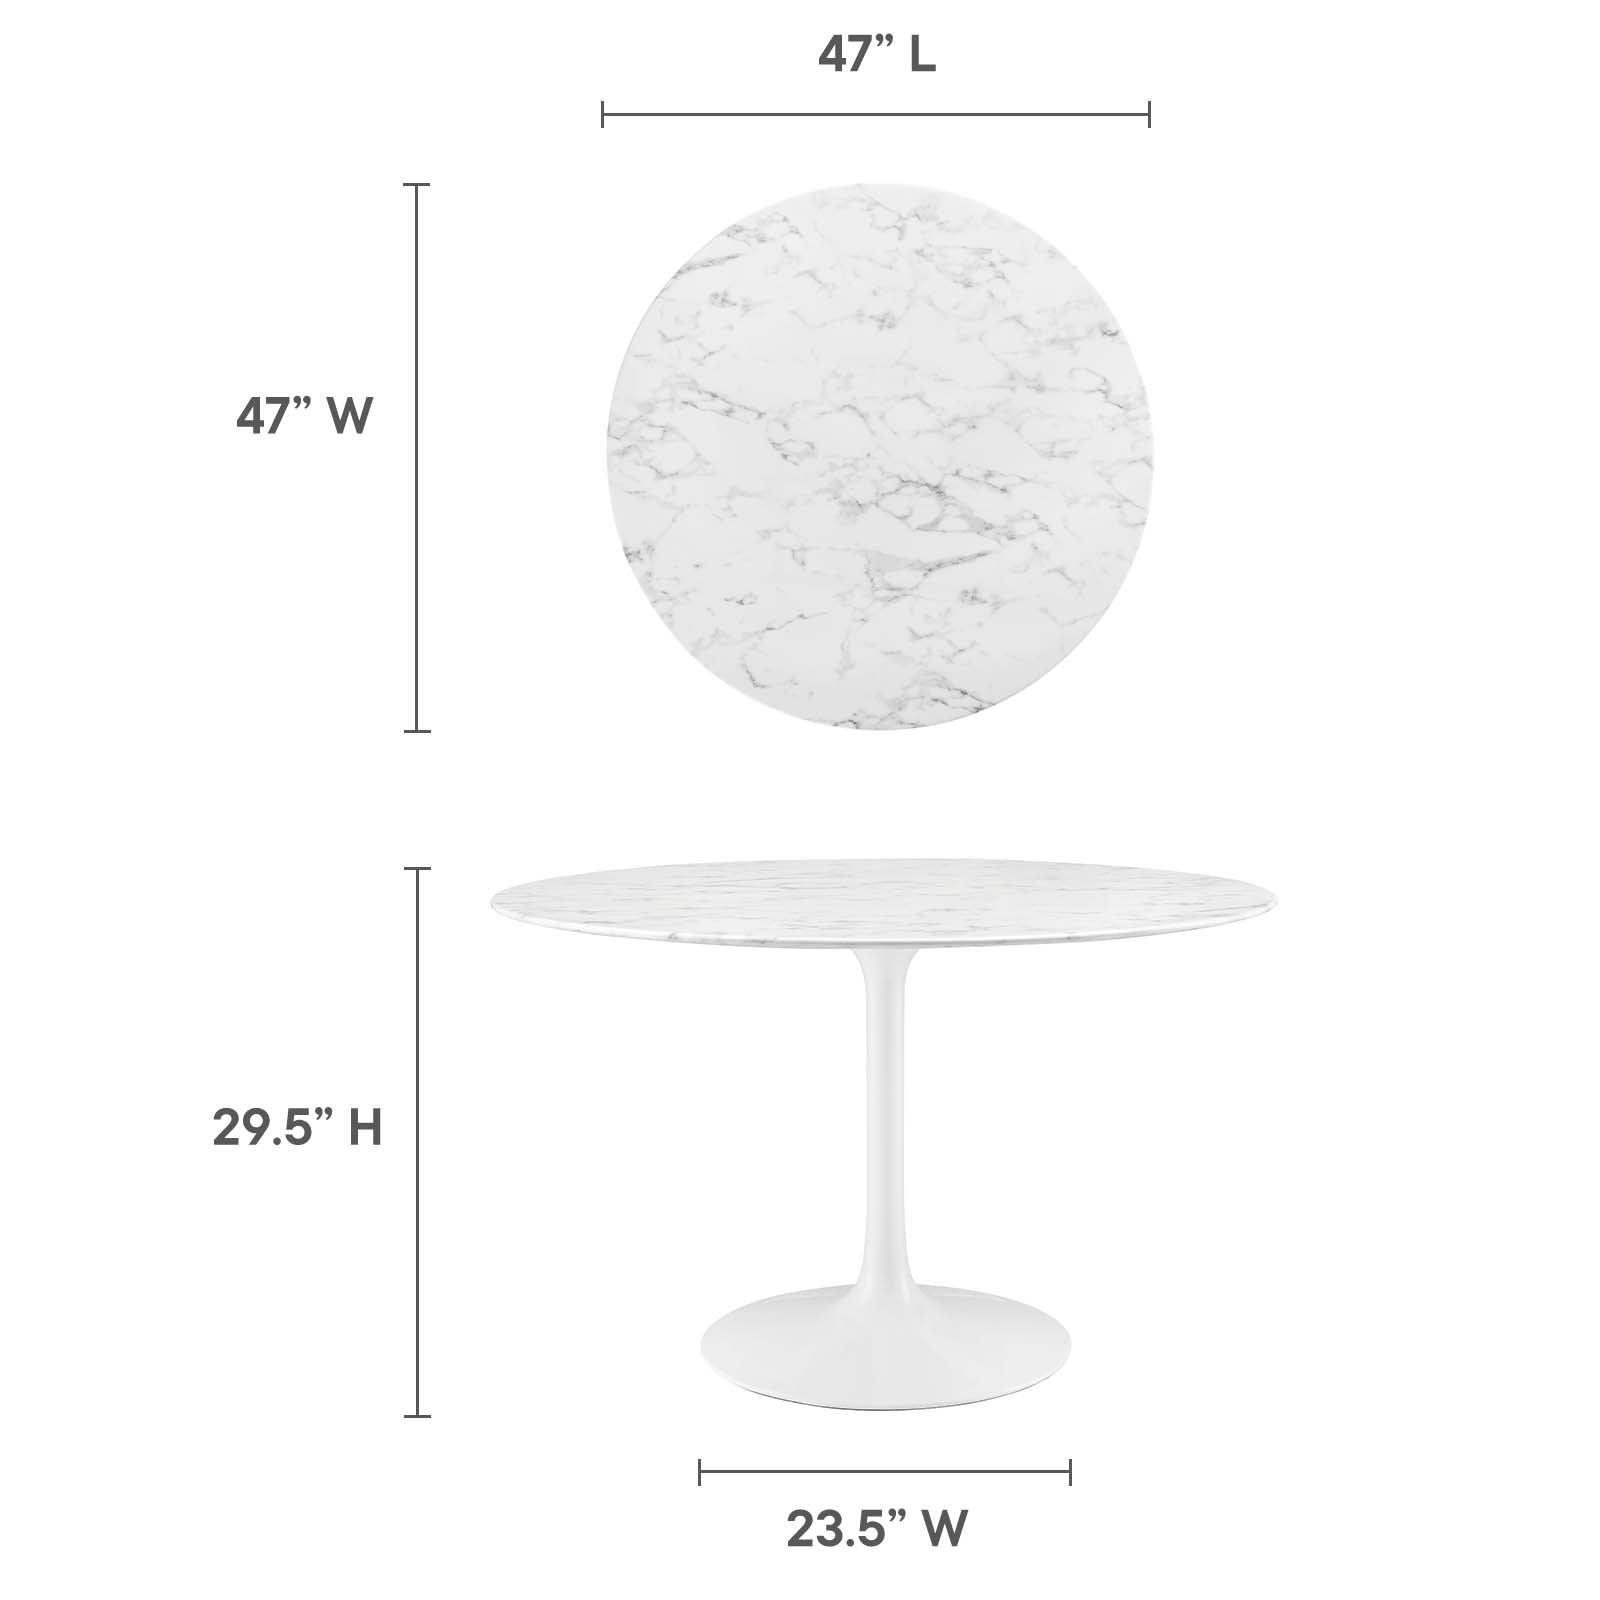 Modway Lippa 48" Round Artificial Marble Dining Table FredCo